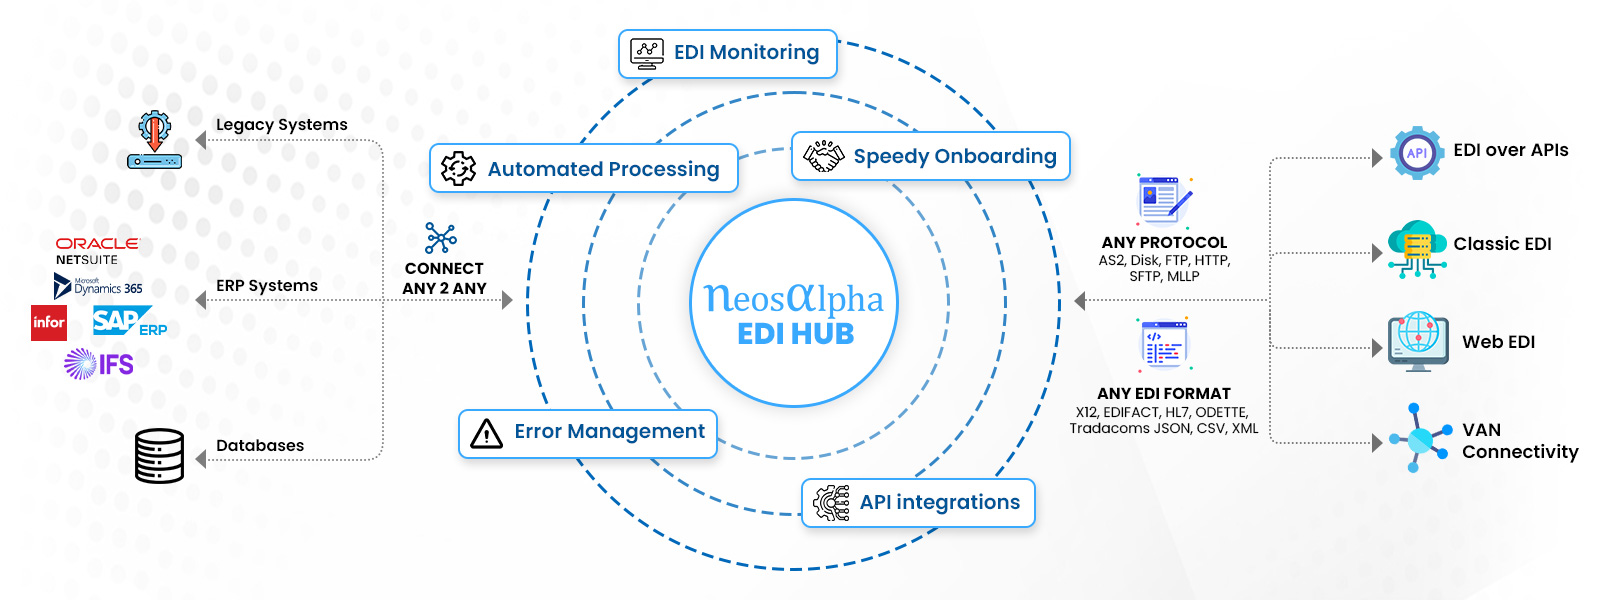 Techno Q - NetSuite CRM provides a seamless flow of information